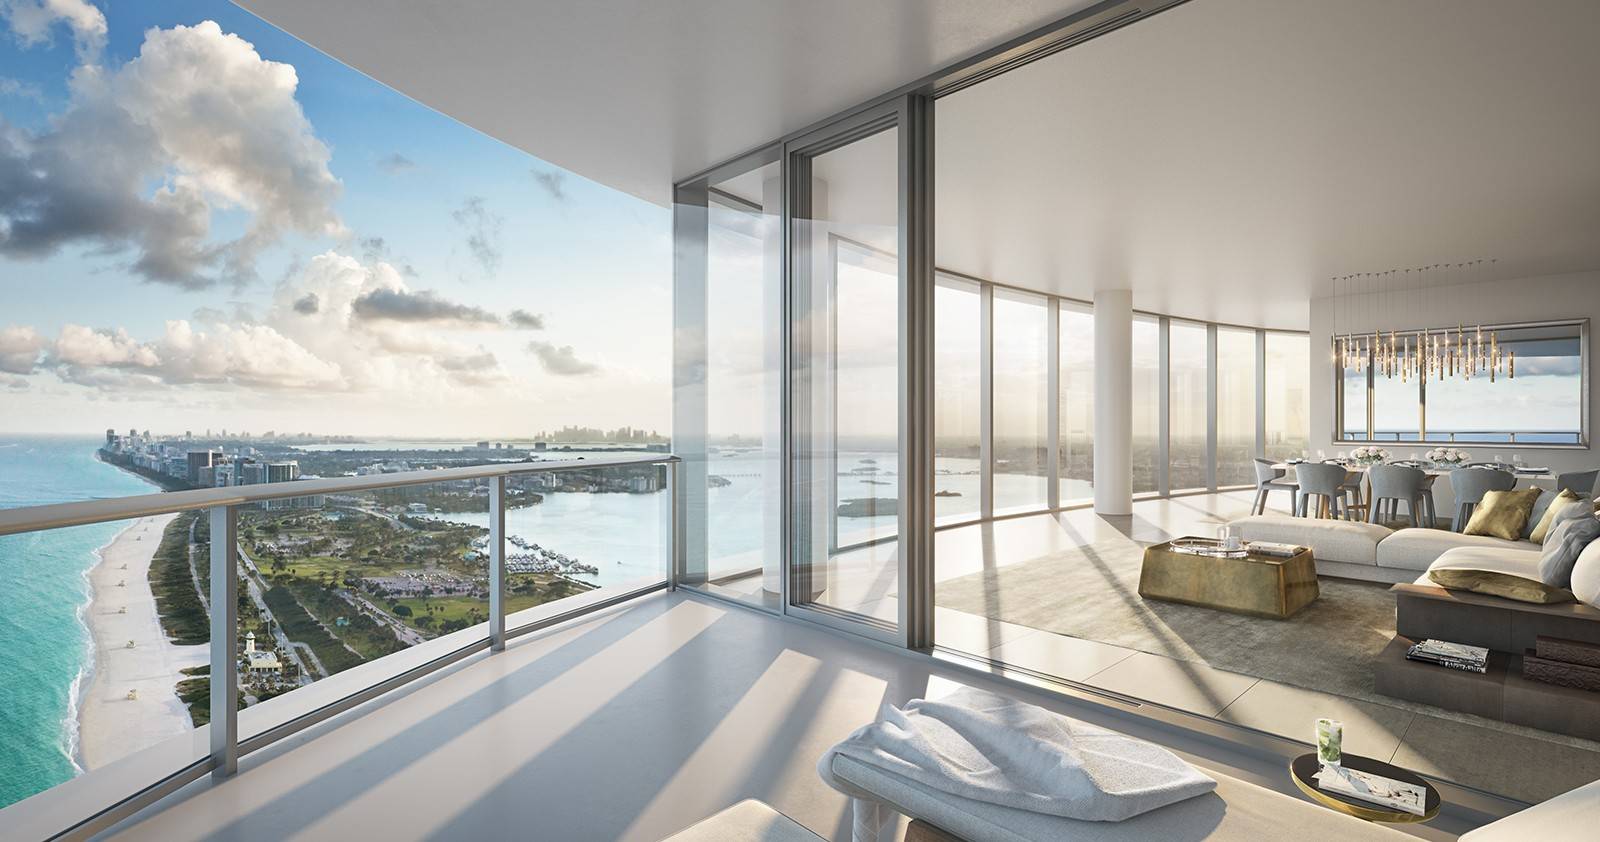 Your Place in the Sun, The Ritz-Carlton Residences in Sunny Isles, Florida